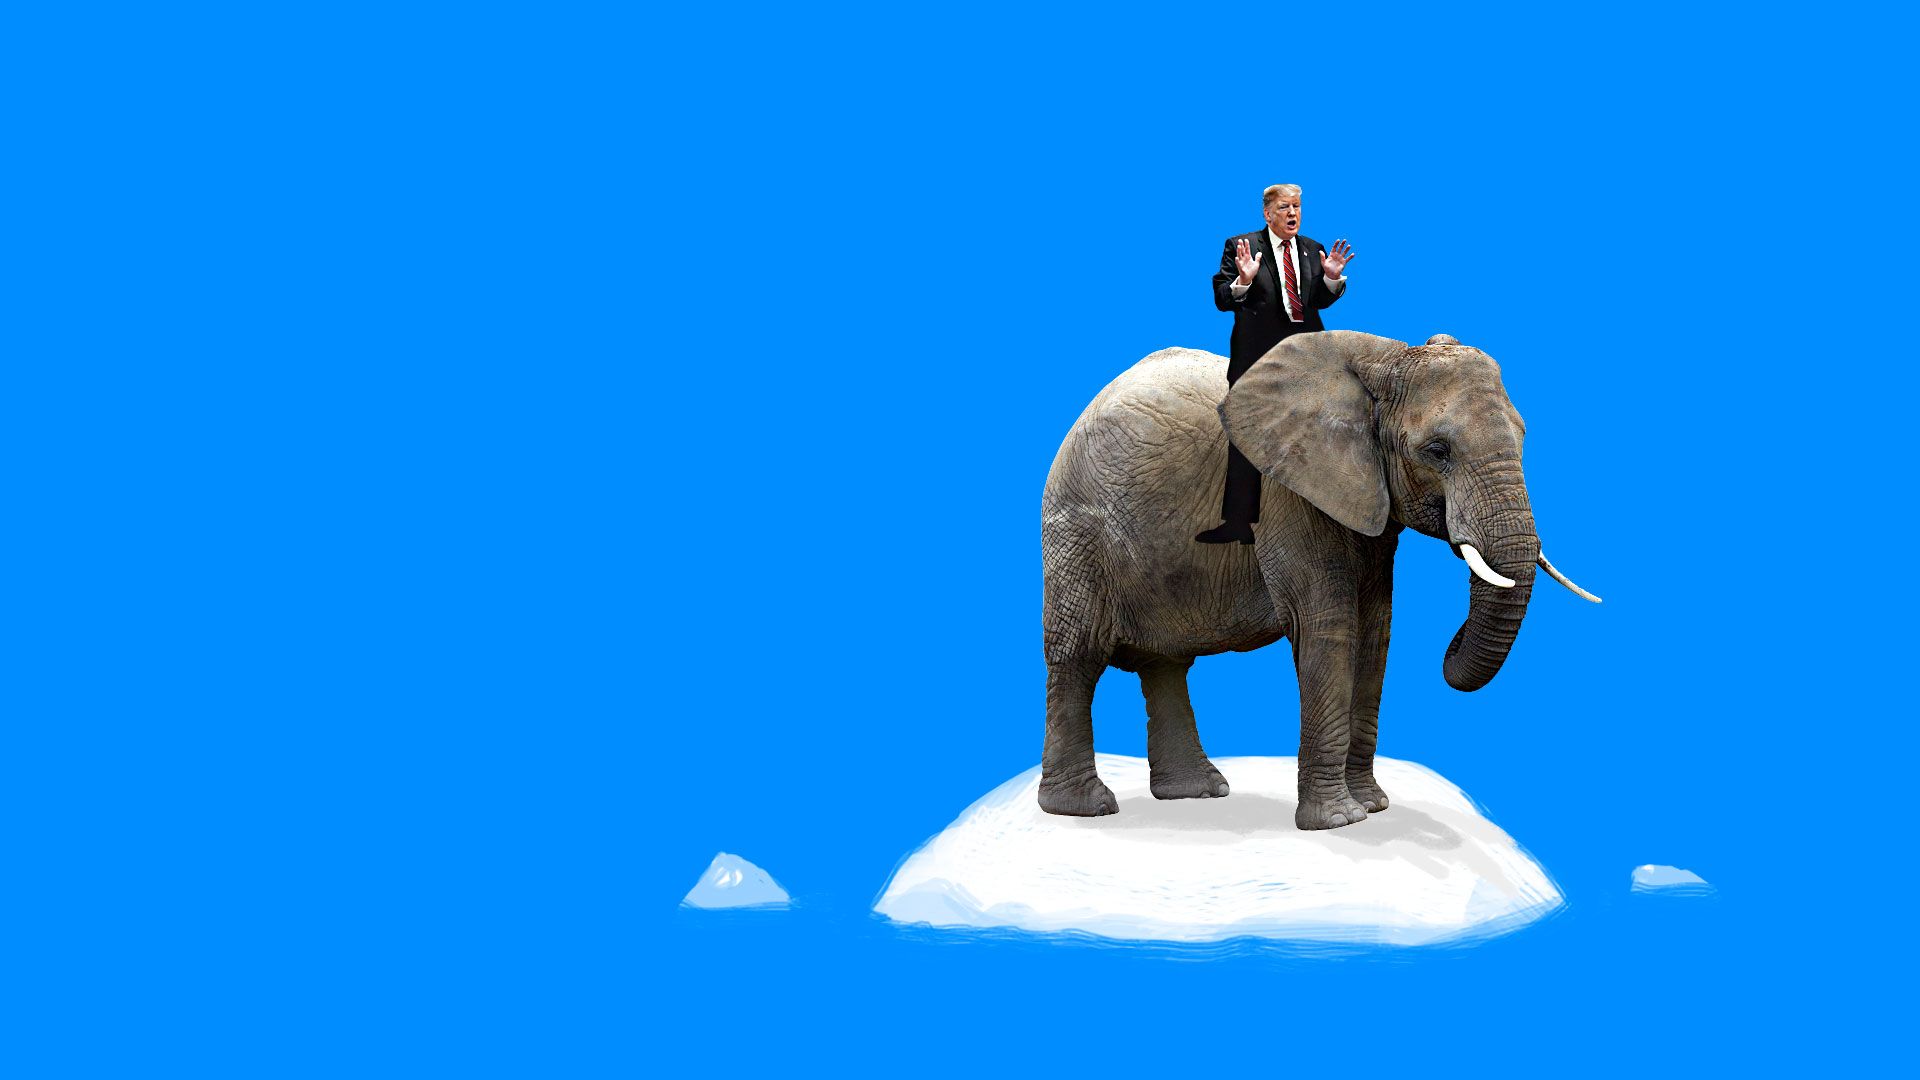 Trump riding an elephant while floating on a sheet of ice